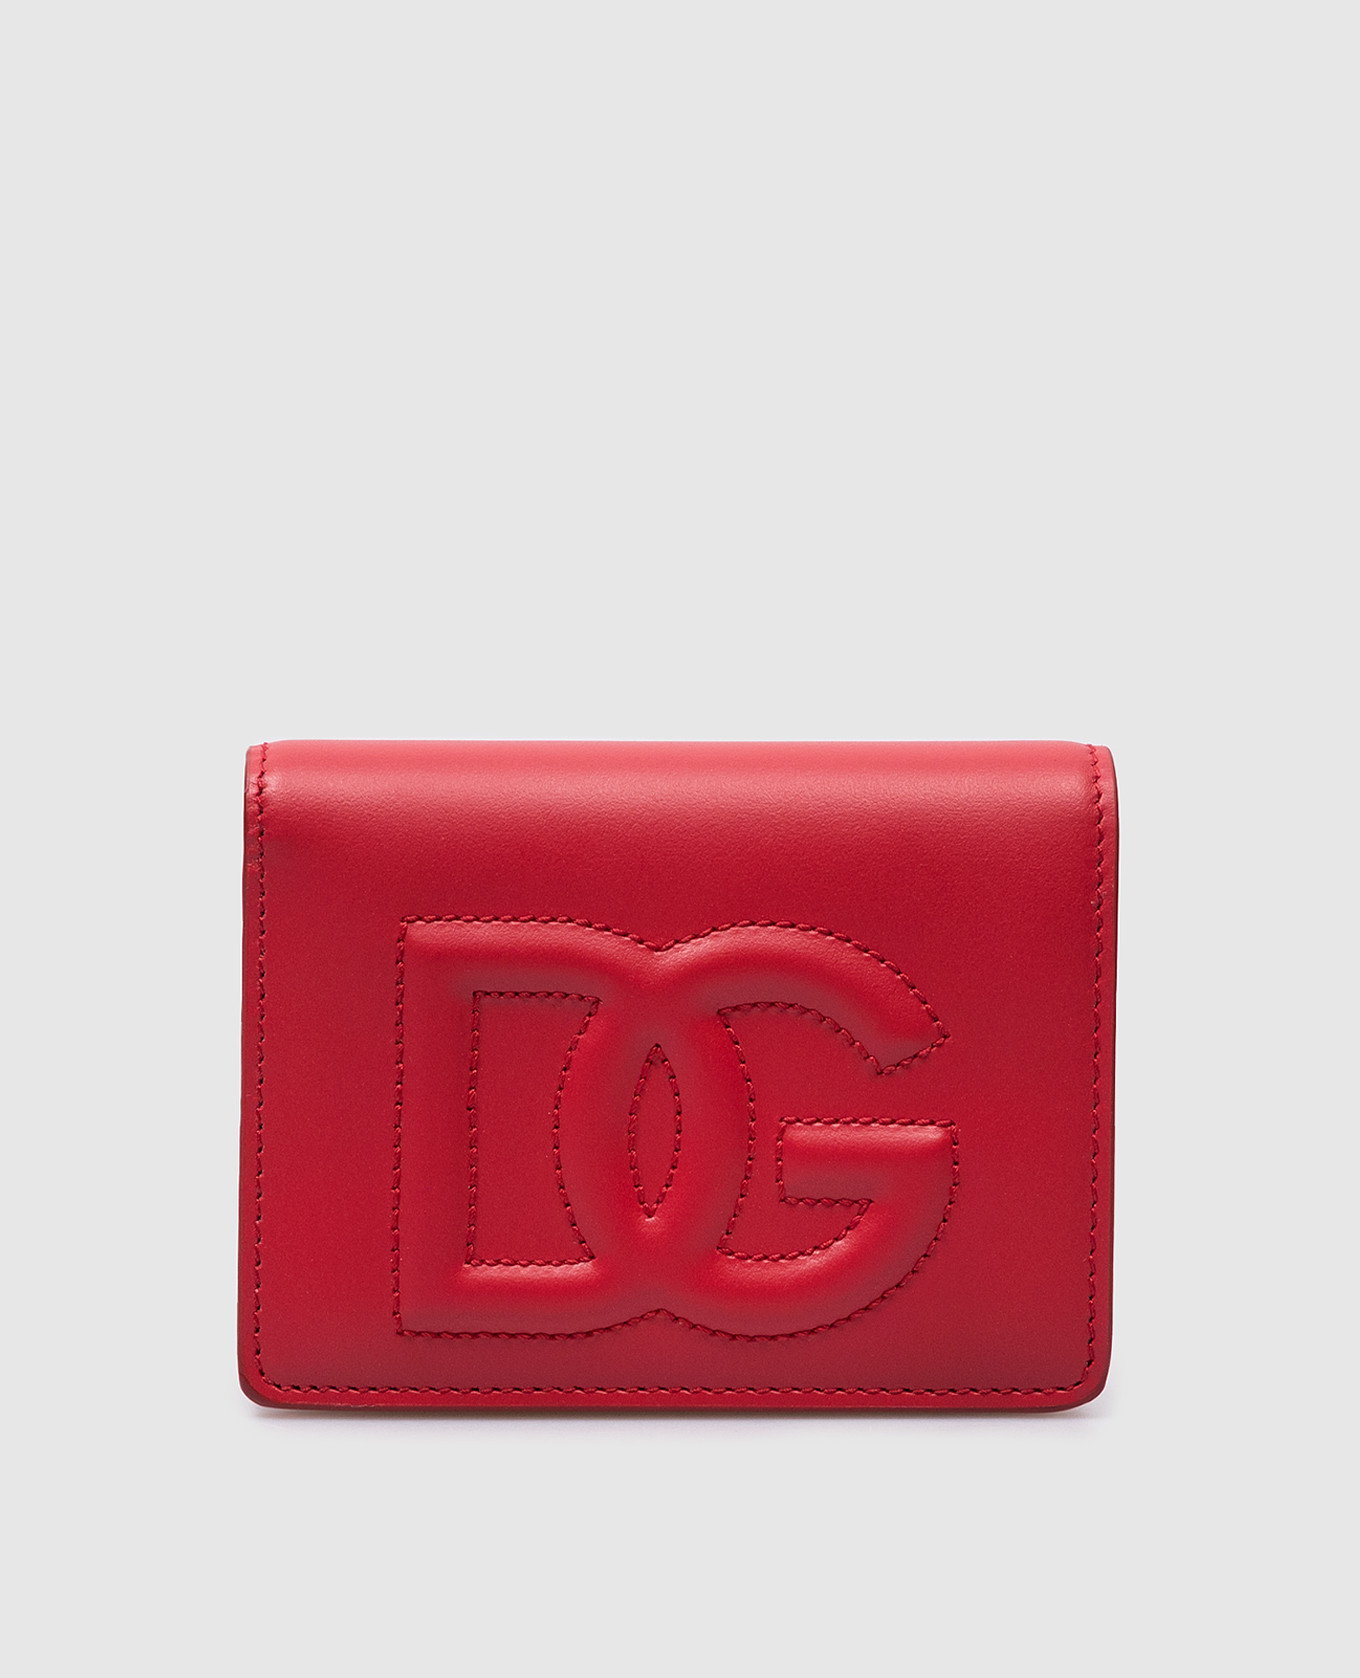 Red leather purse with monogram logo embroidery